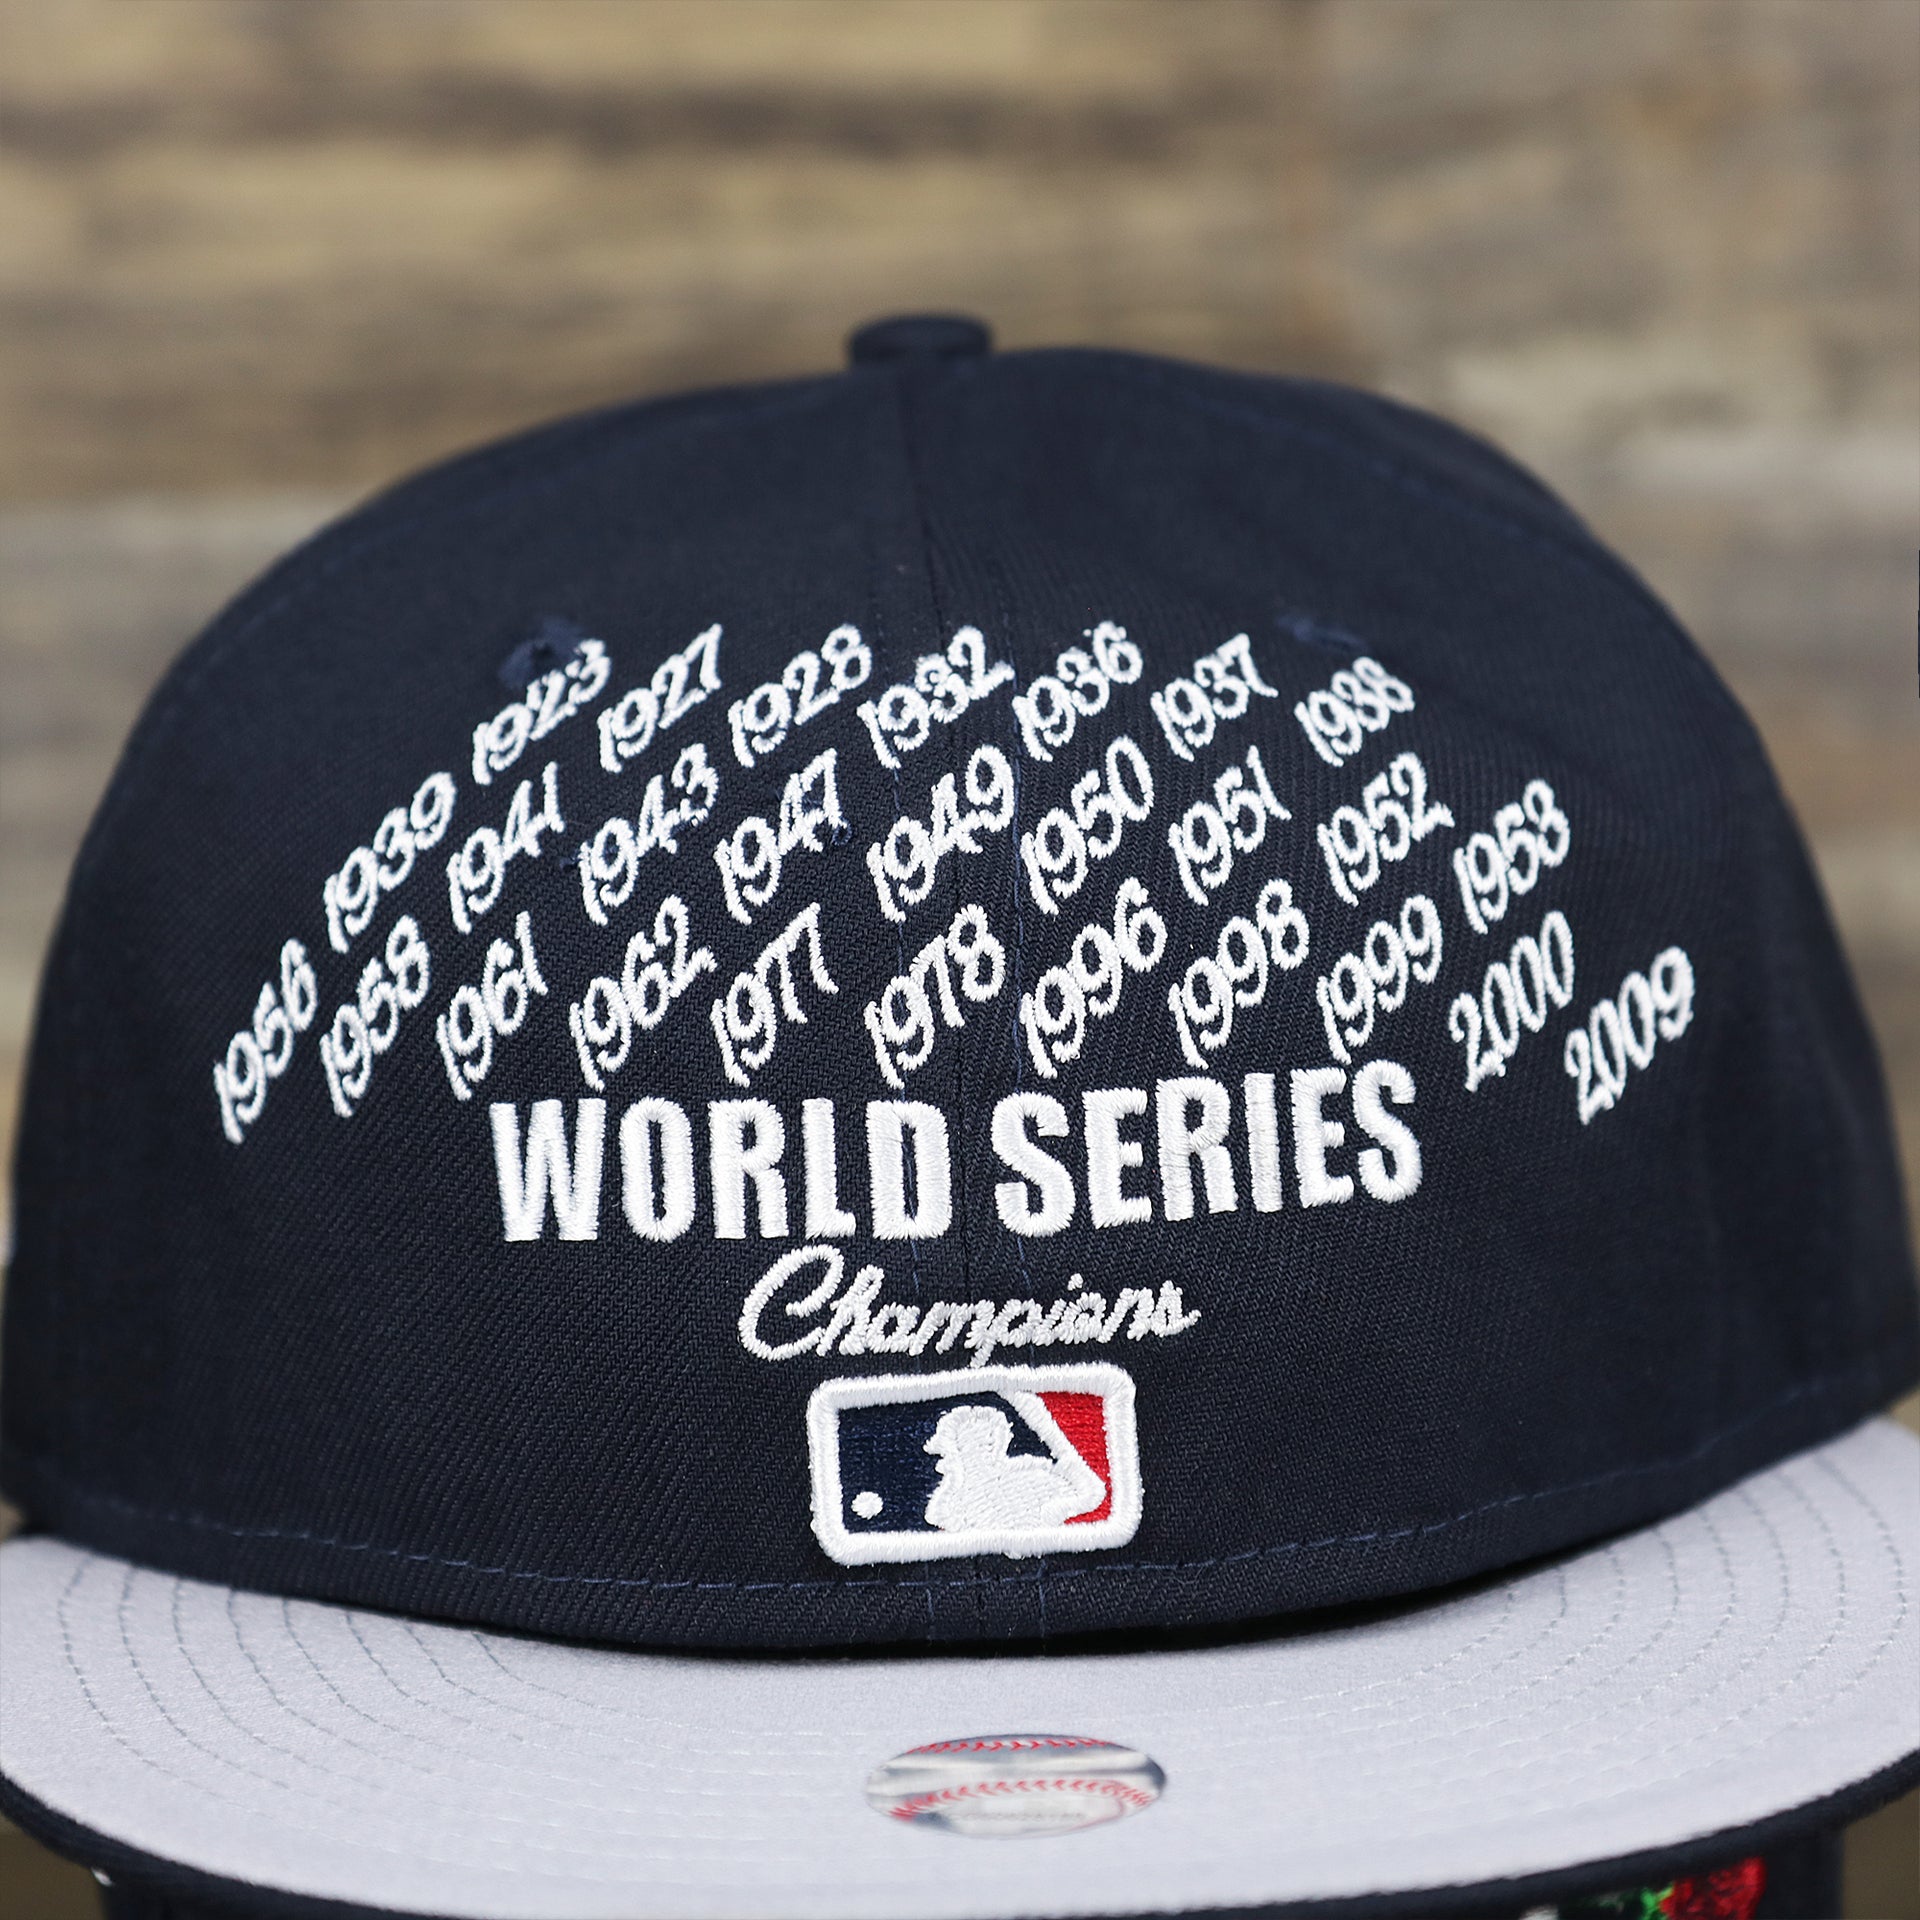 The World Series Wins on the New York Yankees Crown Champions Gray Bottom World Championship Wins Embroidered Fitted Cap | Navy Blue 59Fifty Cap